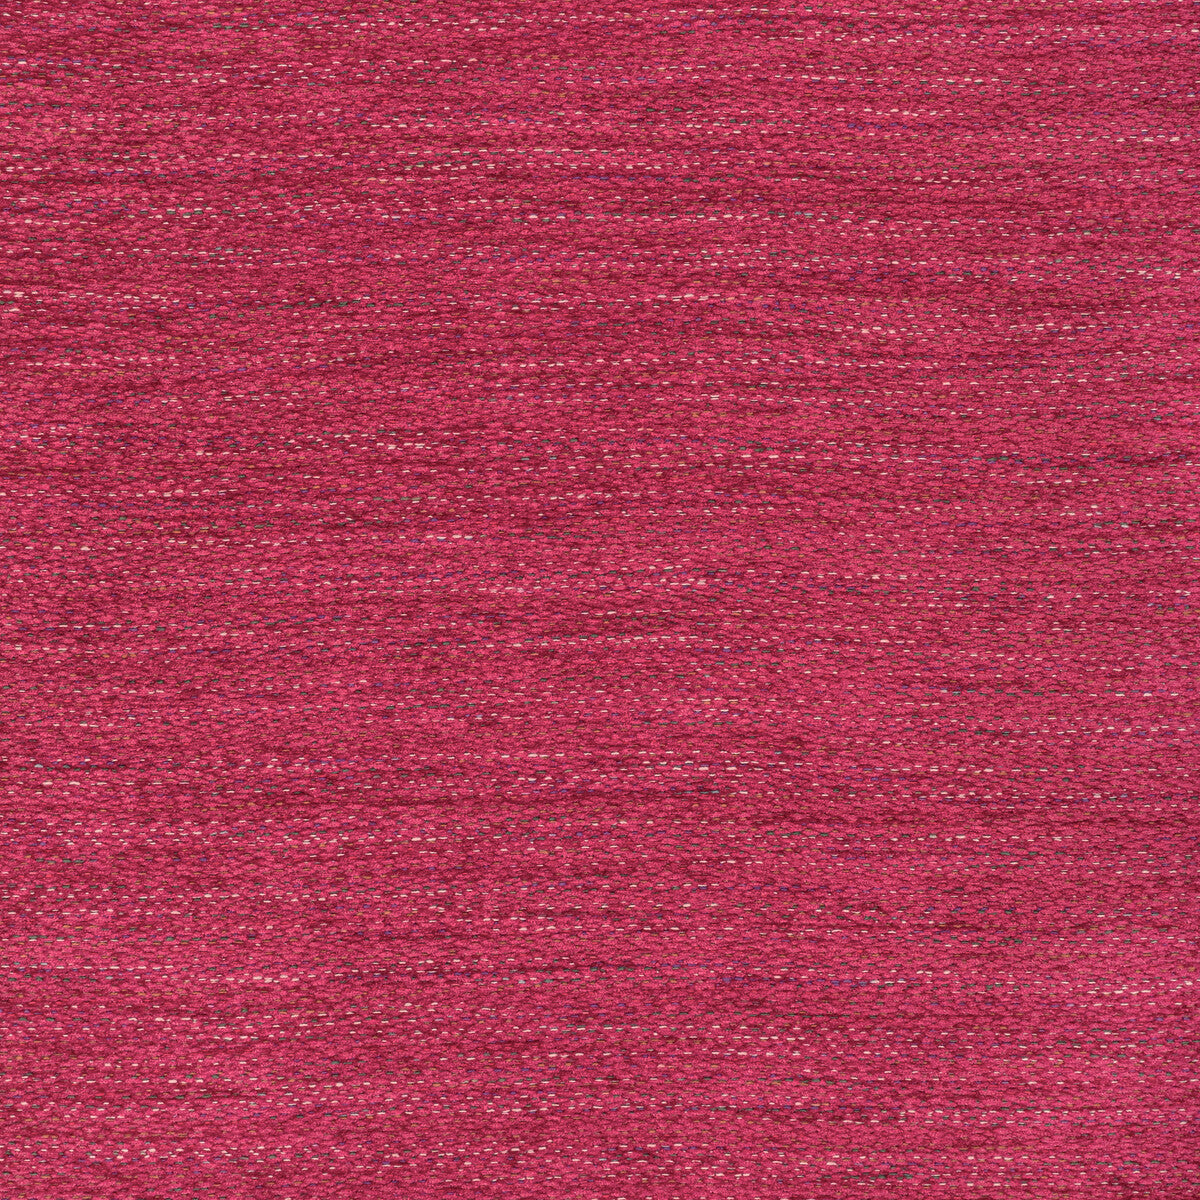 Roberty Texture fabric in berry color - pattern 8022127.97.0 - by Brunschwig &amp; Fils in the Chambery Textures III collection